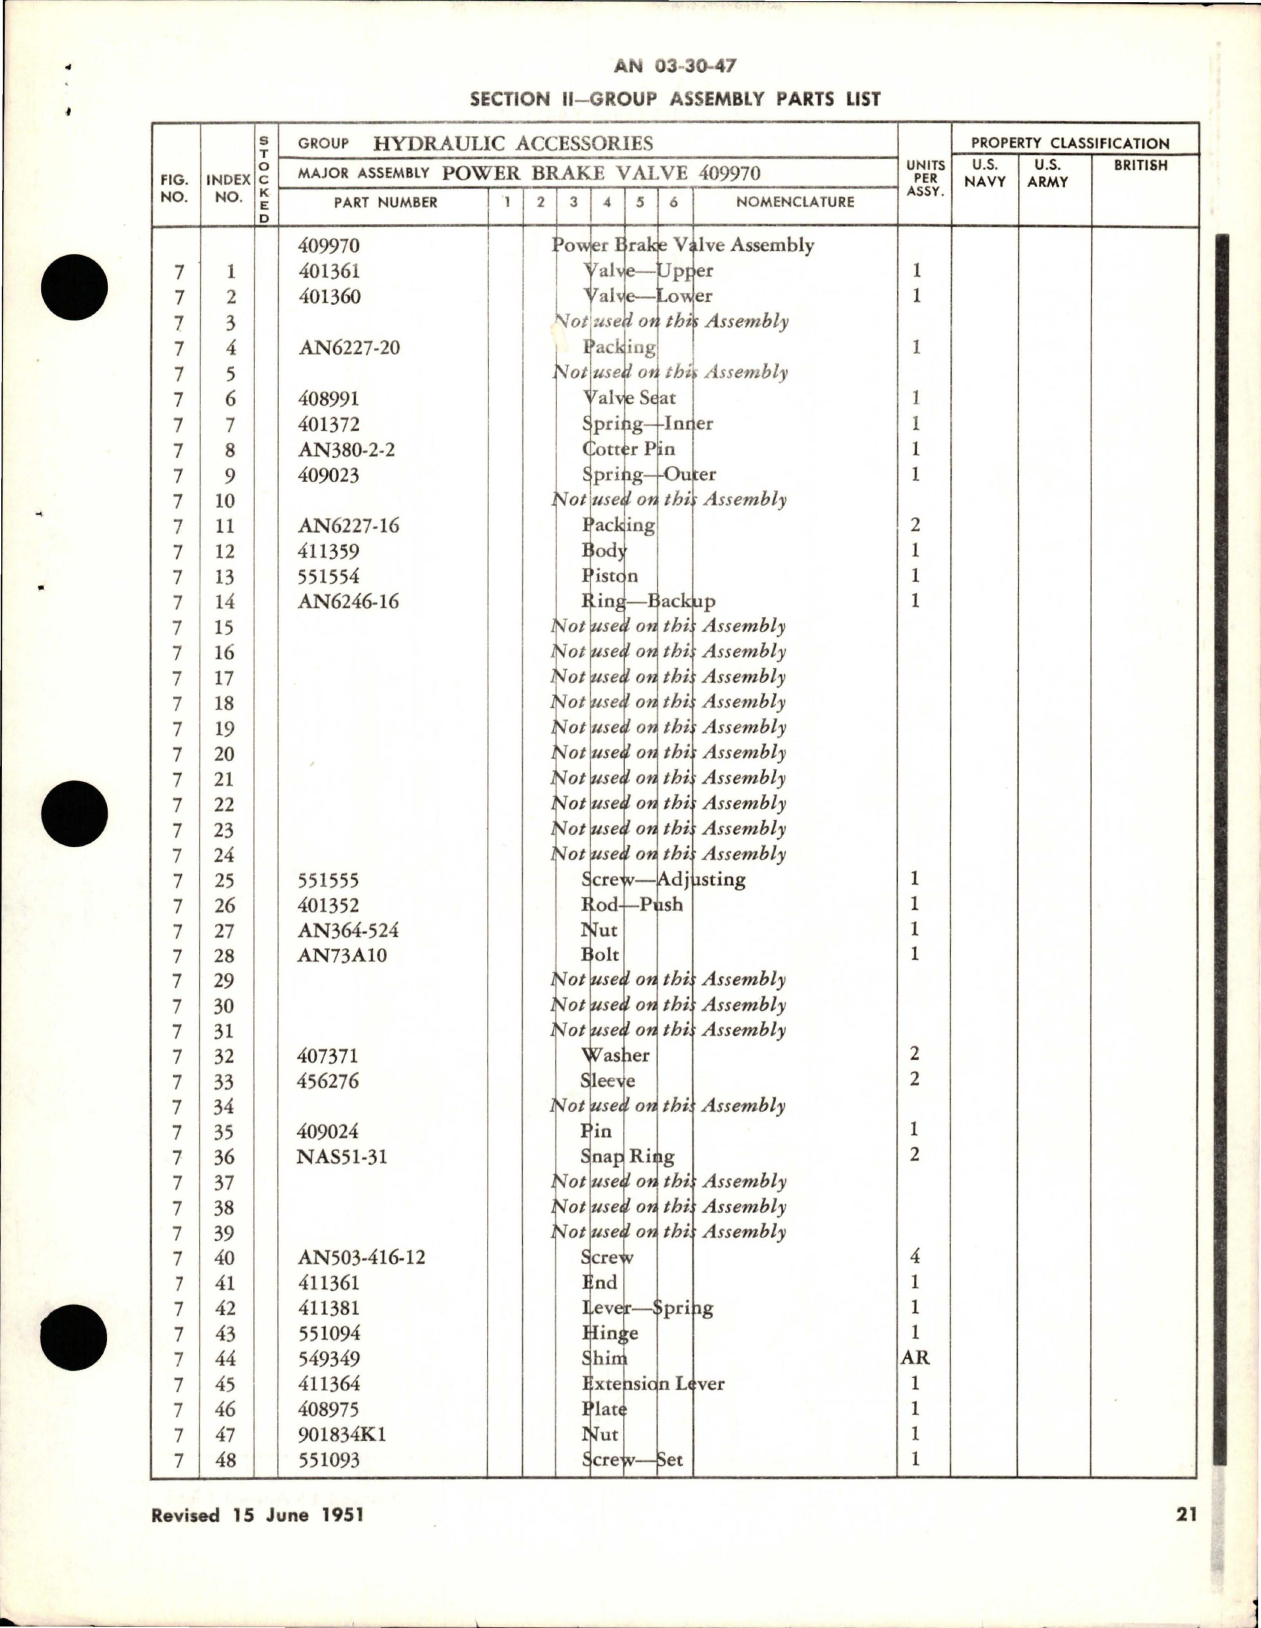 Sample page 5 from AirCorps Library document: Operation, Service, and Overhaul Instructions with Parts Catalog for Power Brake Valves